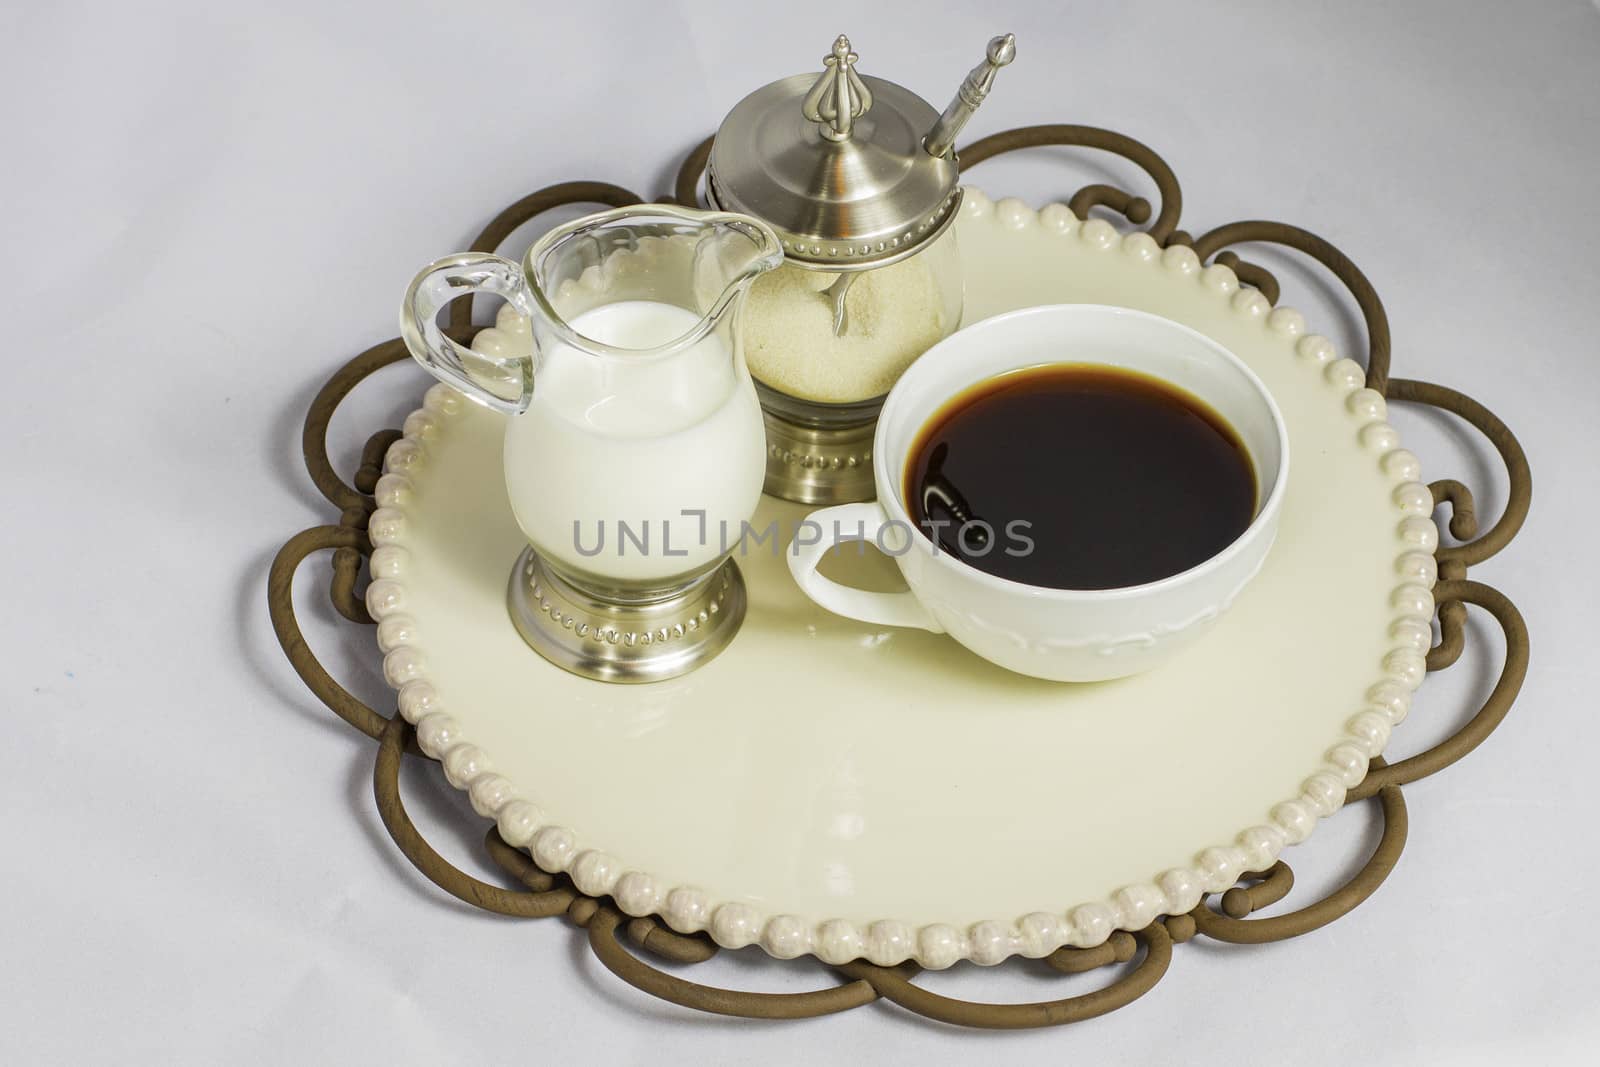 A fresh cup of coffee sitting on a decorative plate with cream and organic sugar.